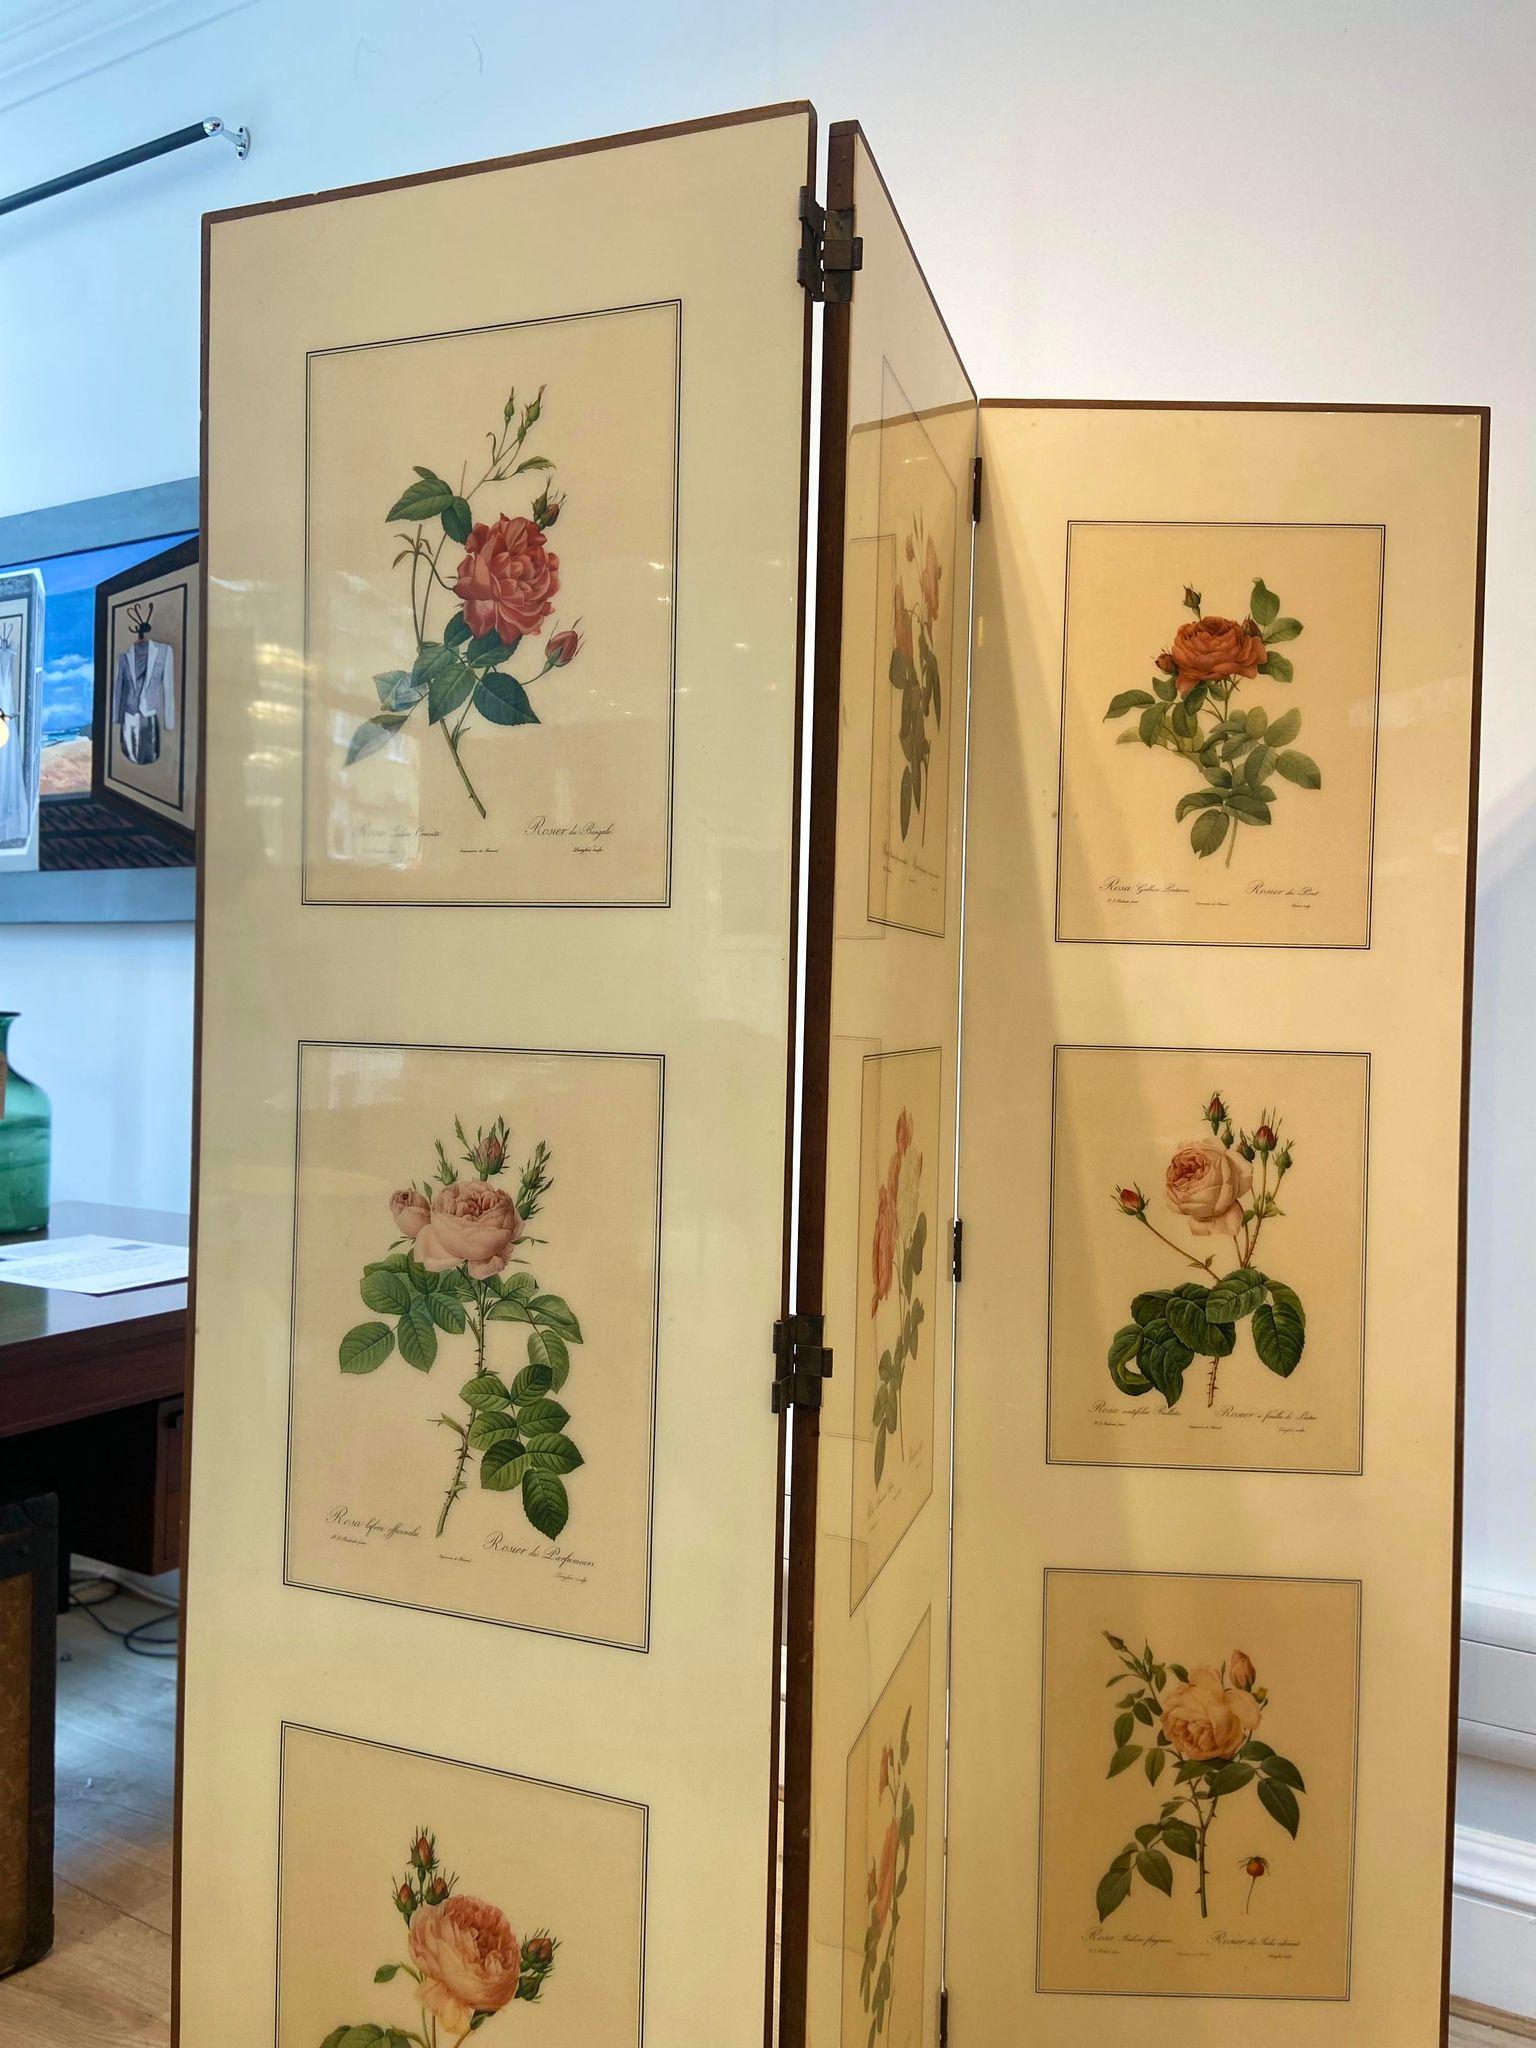 20th Century A 1950's folding screen / room divider with Victorian botanical lithographs